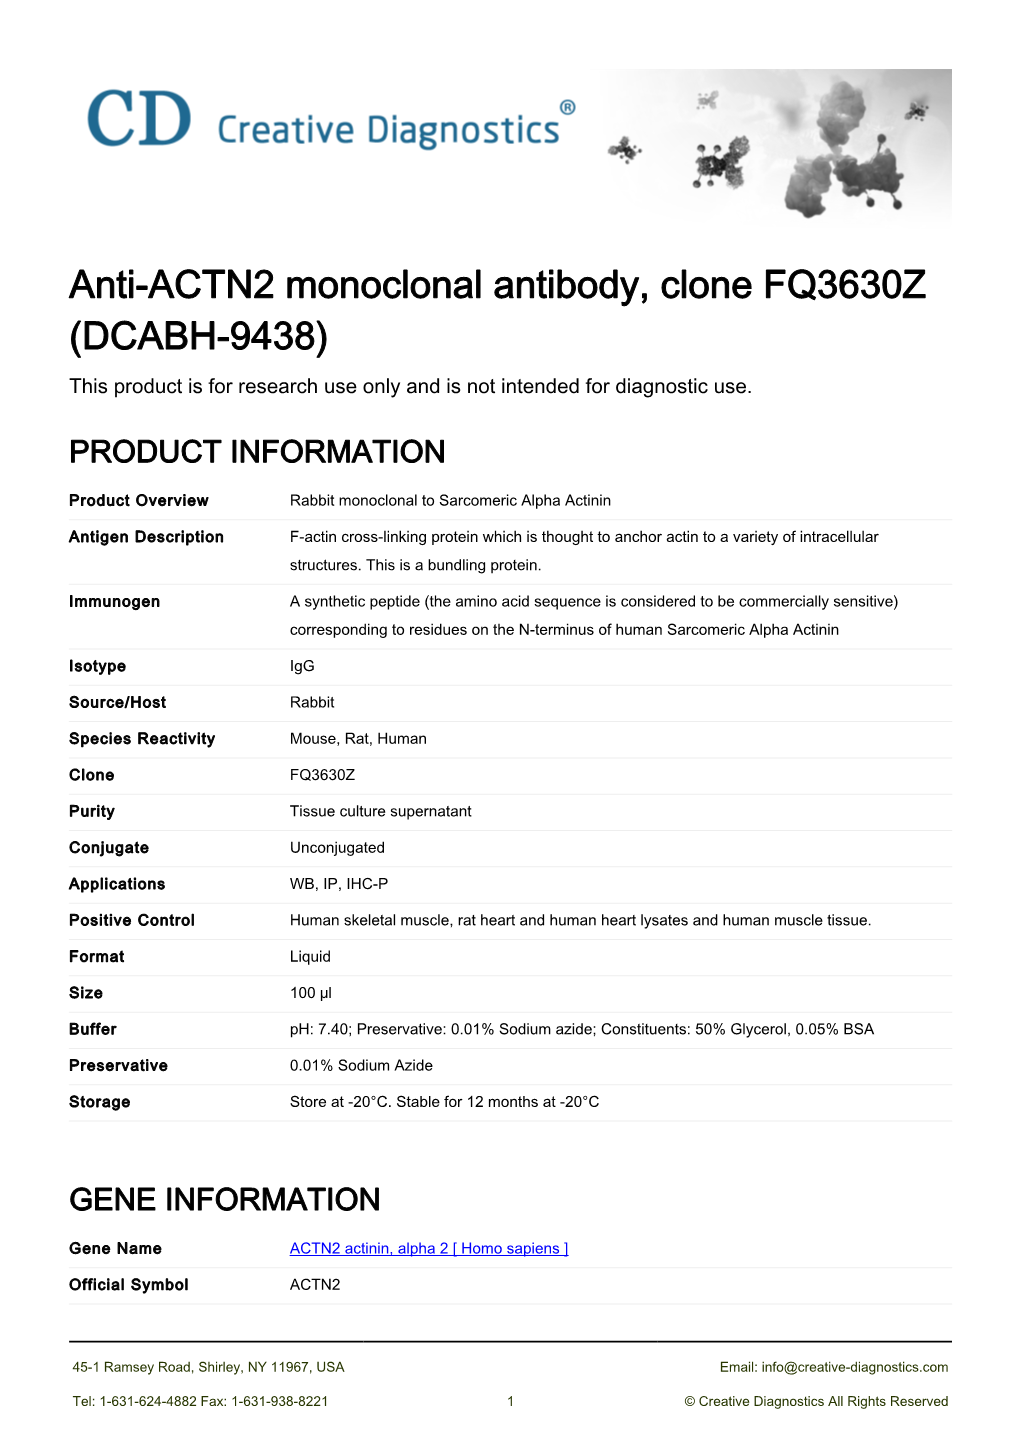 Anti-ACTN2 Monoclonal Antibody, Clone FQ3630Z (DCABH-9438) This Product Is for Research Use Only and Is Not Intended for Diagnostic Use